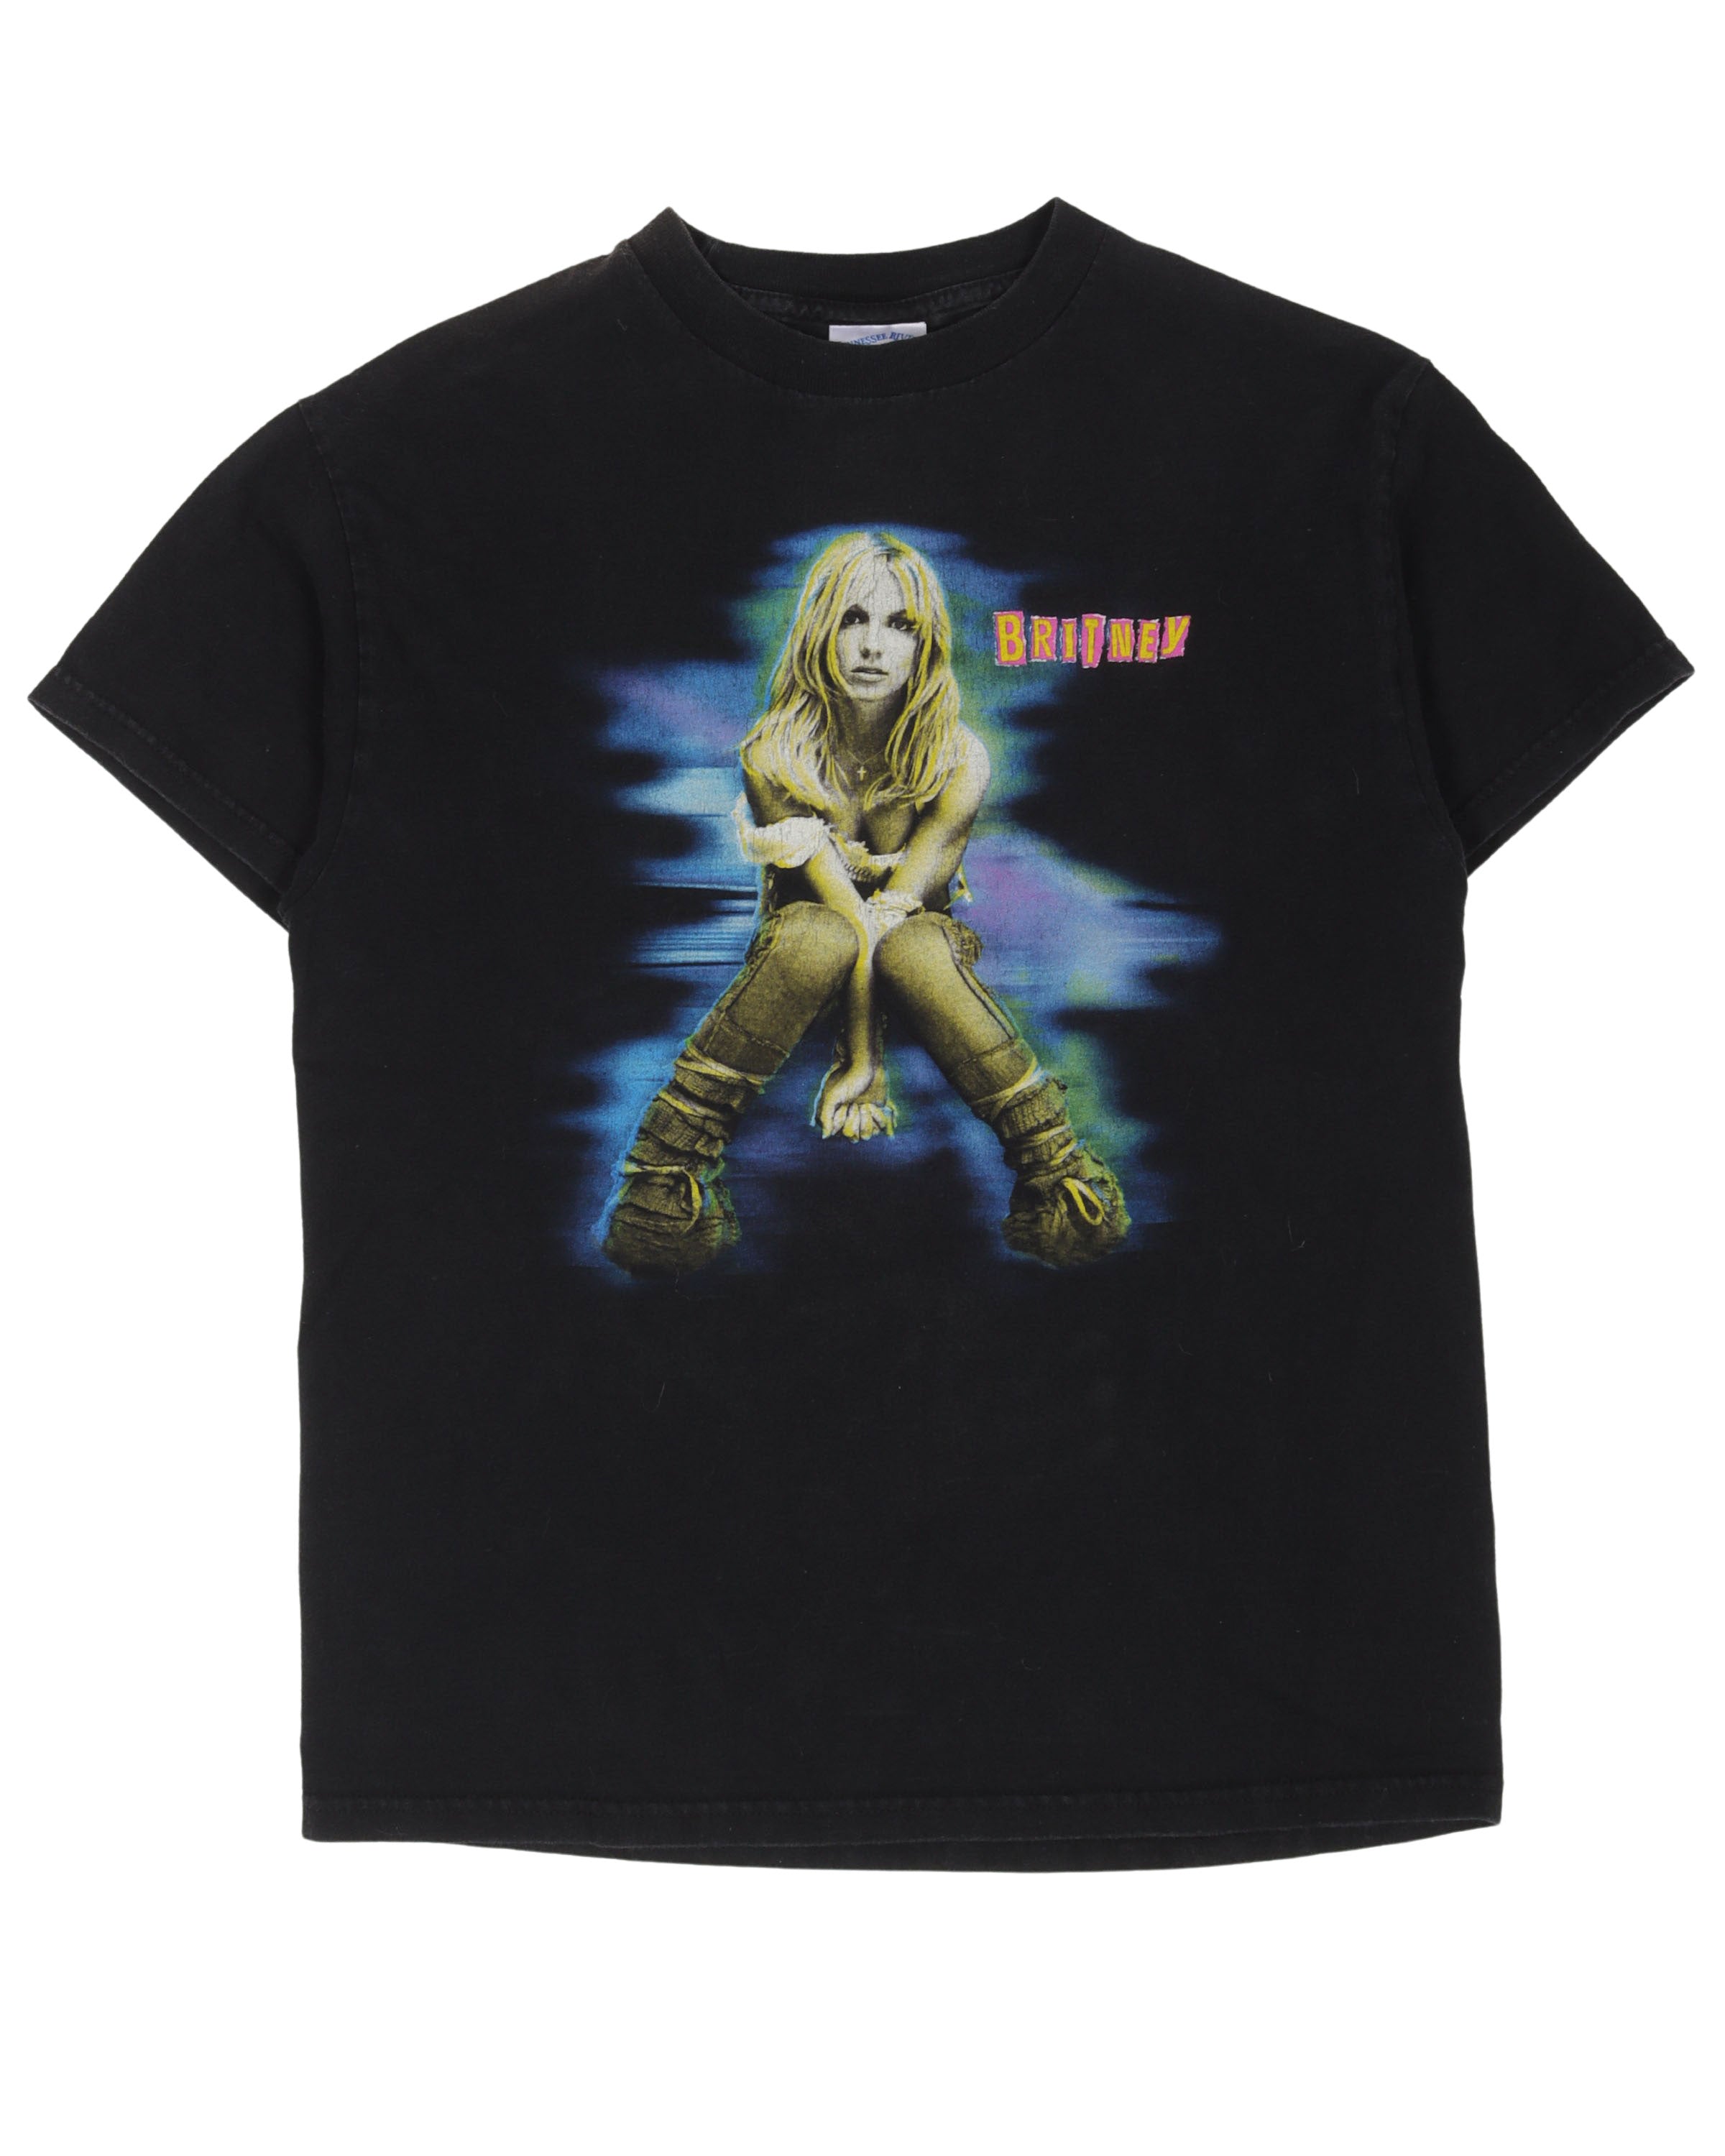 Britney Spears Tour T-Shirt